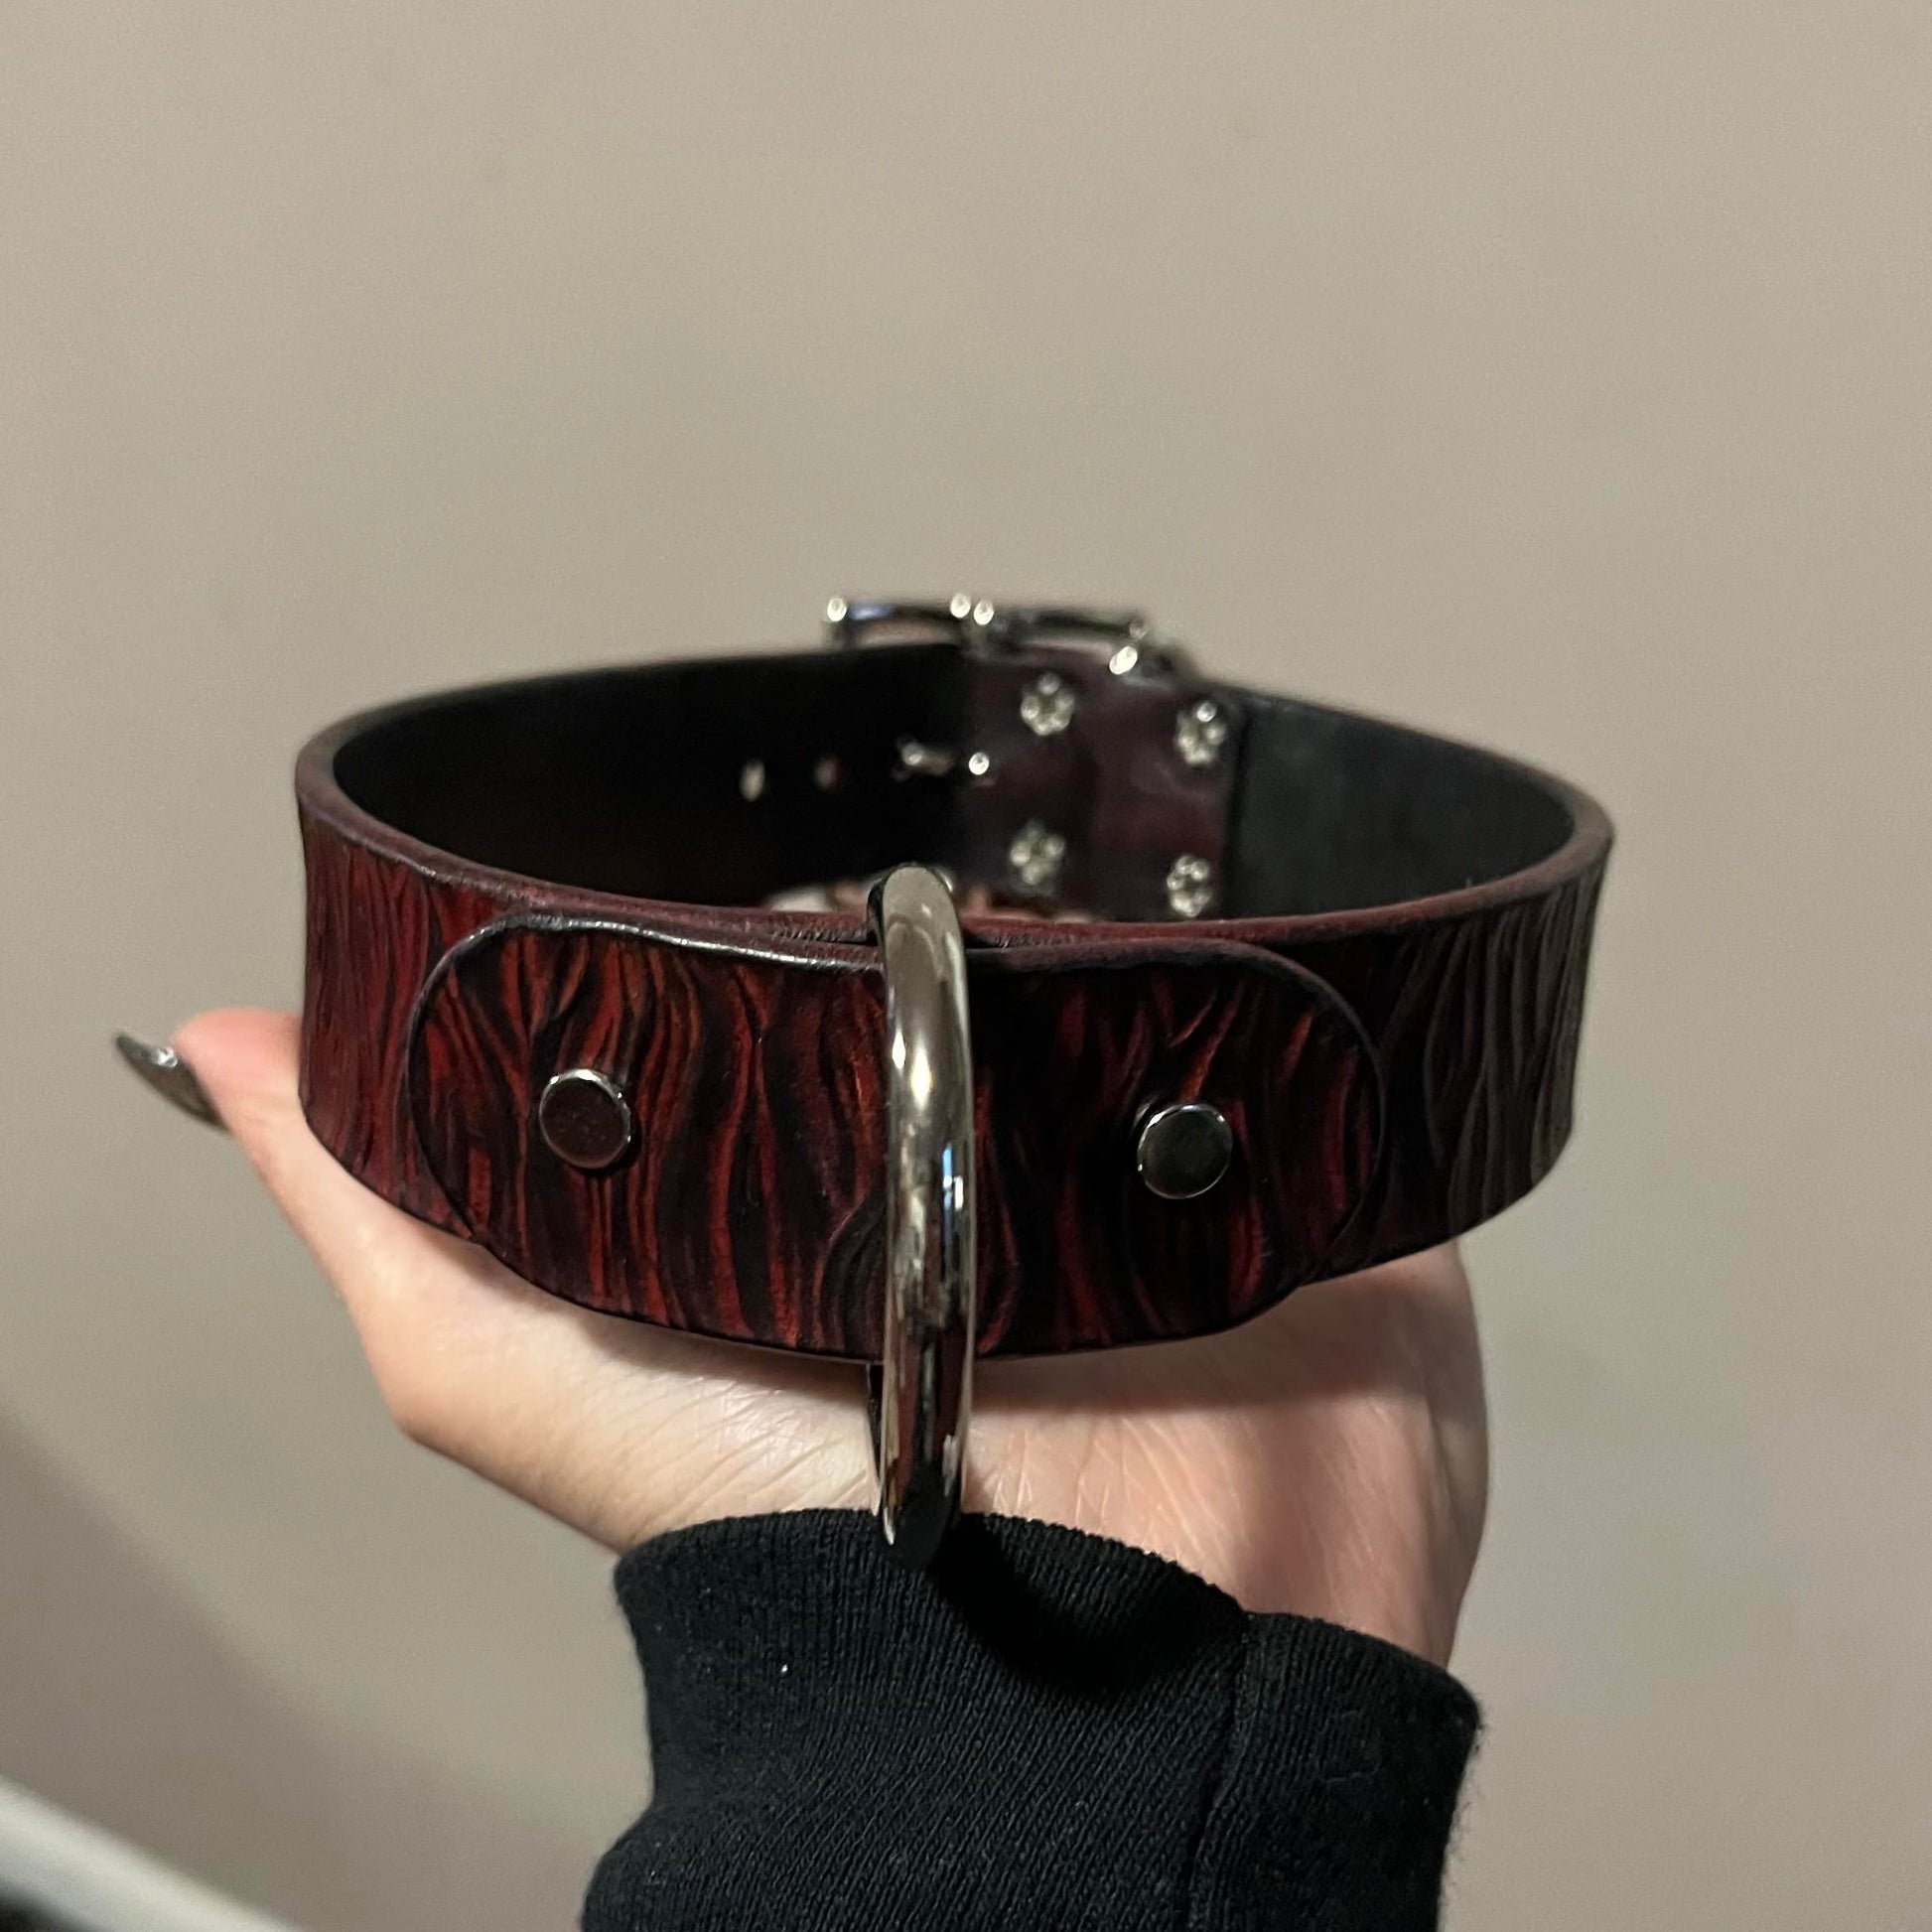 model hand holding collar, front o-ring